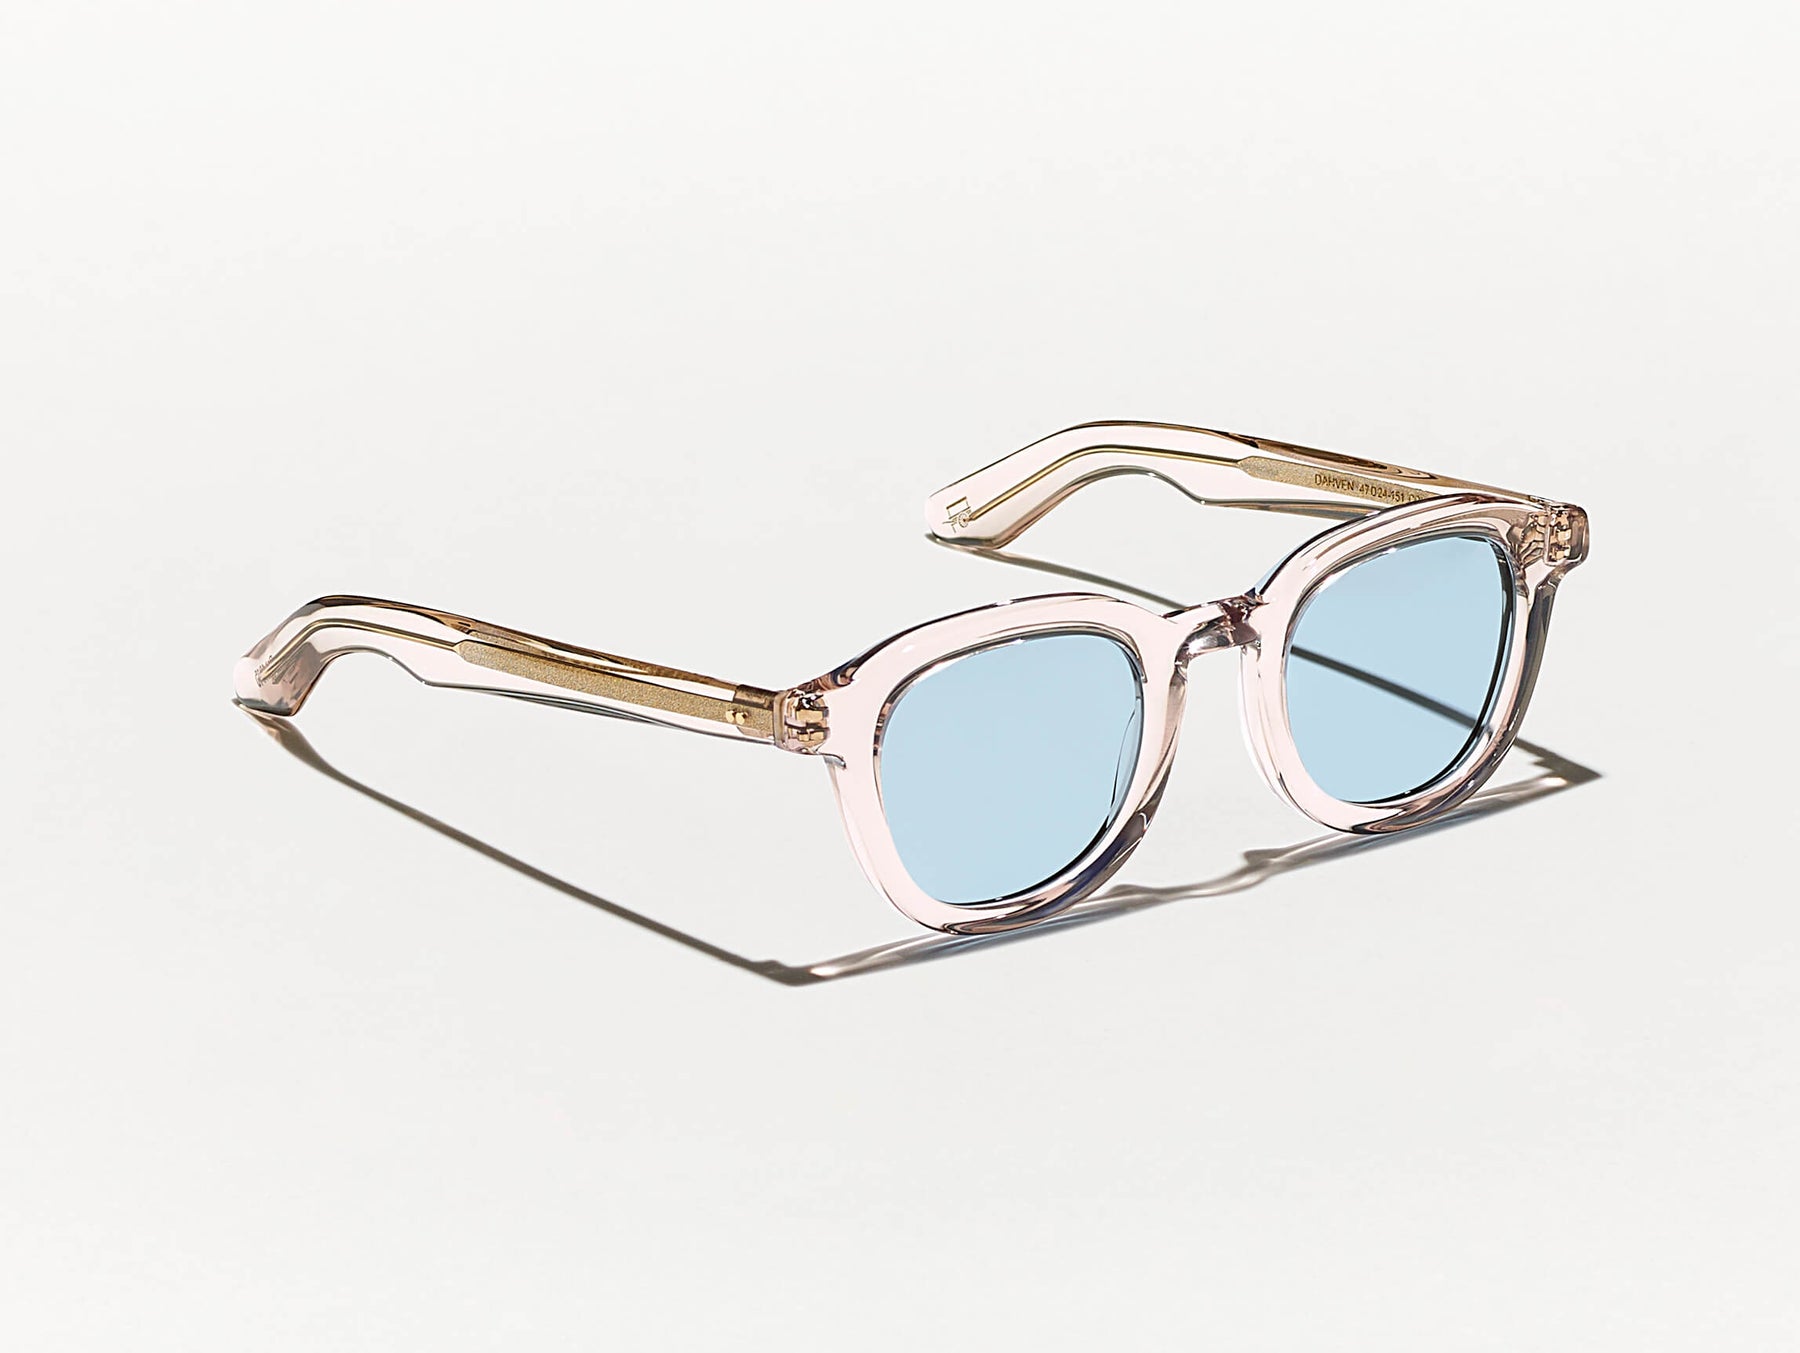 The DAHVEN Pastel with Bel Air Blue Tinted Lenses